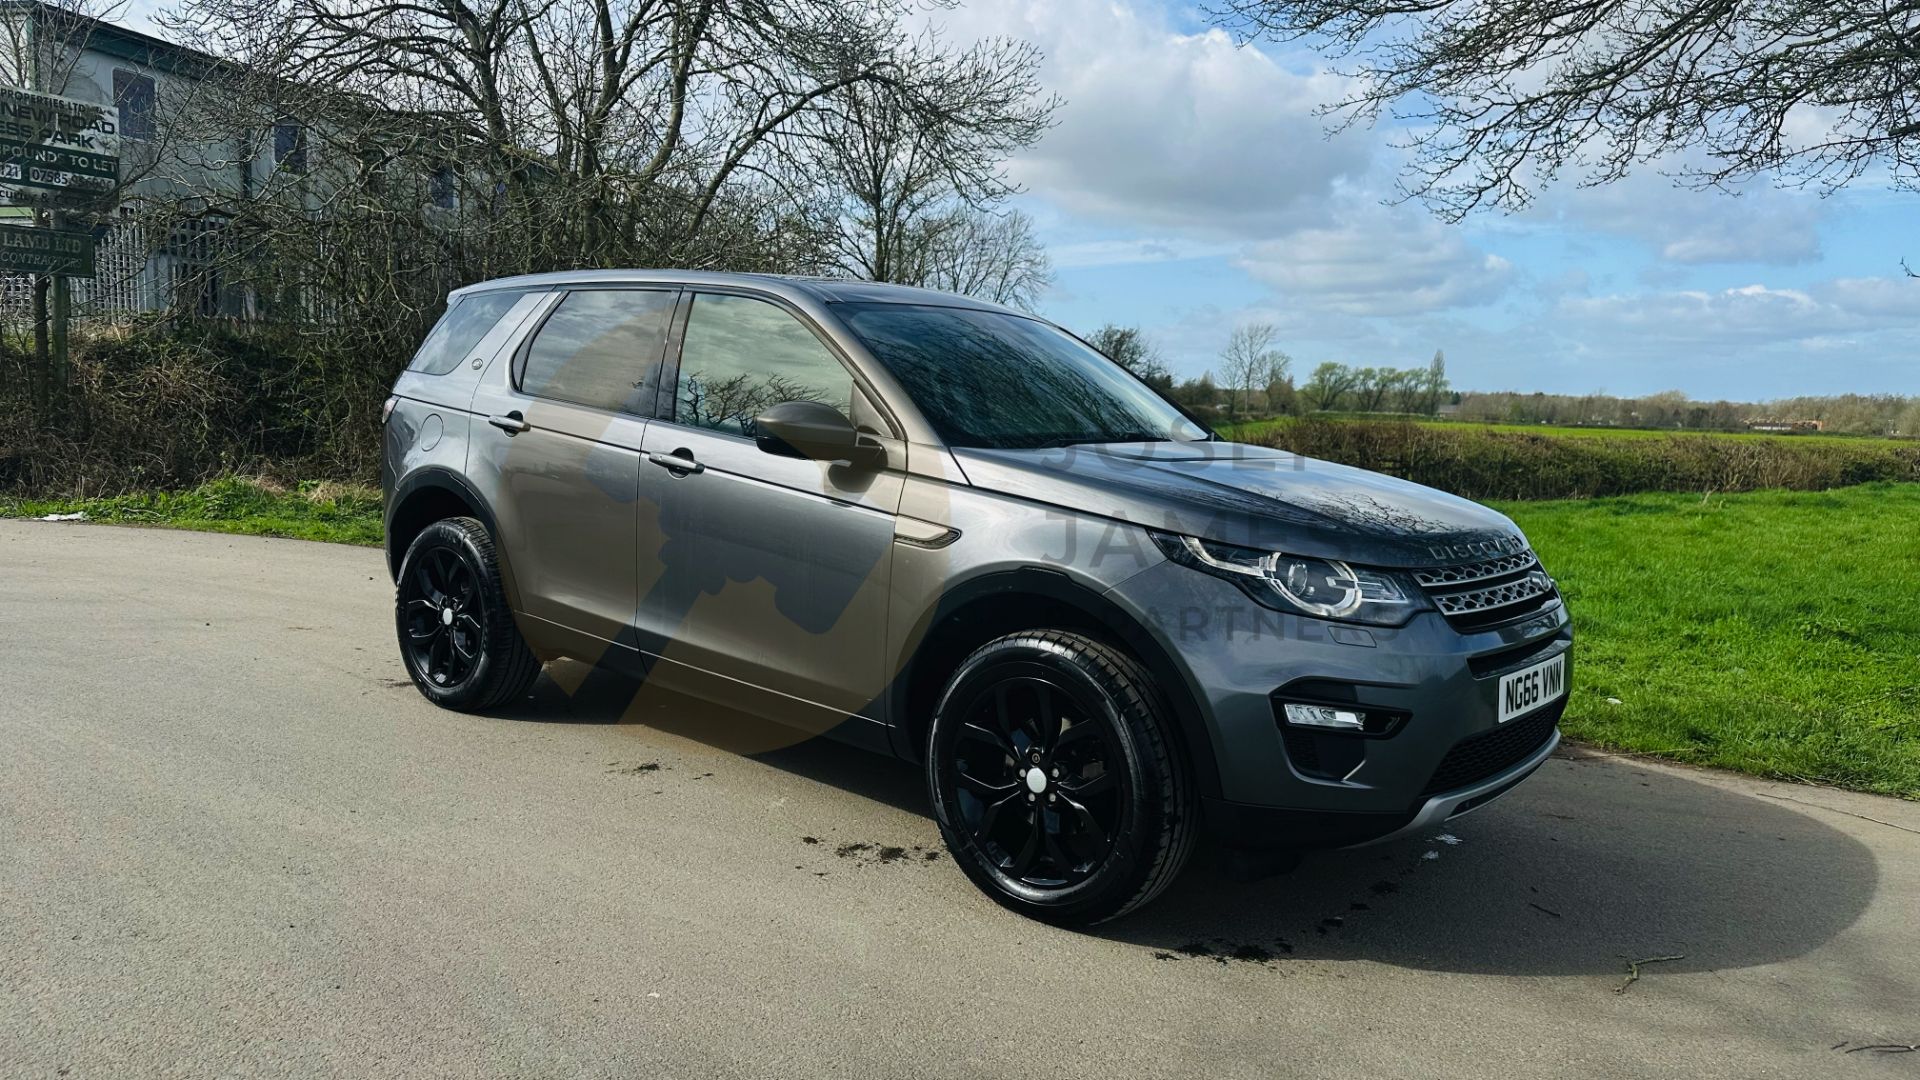 (On Sale) LAND ROVER DISCOVERY SPORT *HSE EDITION* 7 SEATER SUV (2017 - EURO 6) 2.0 TD4 - AUTOMATIC - Image 2 of 48